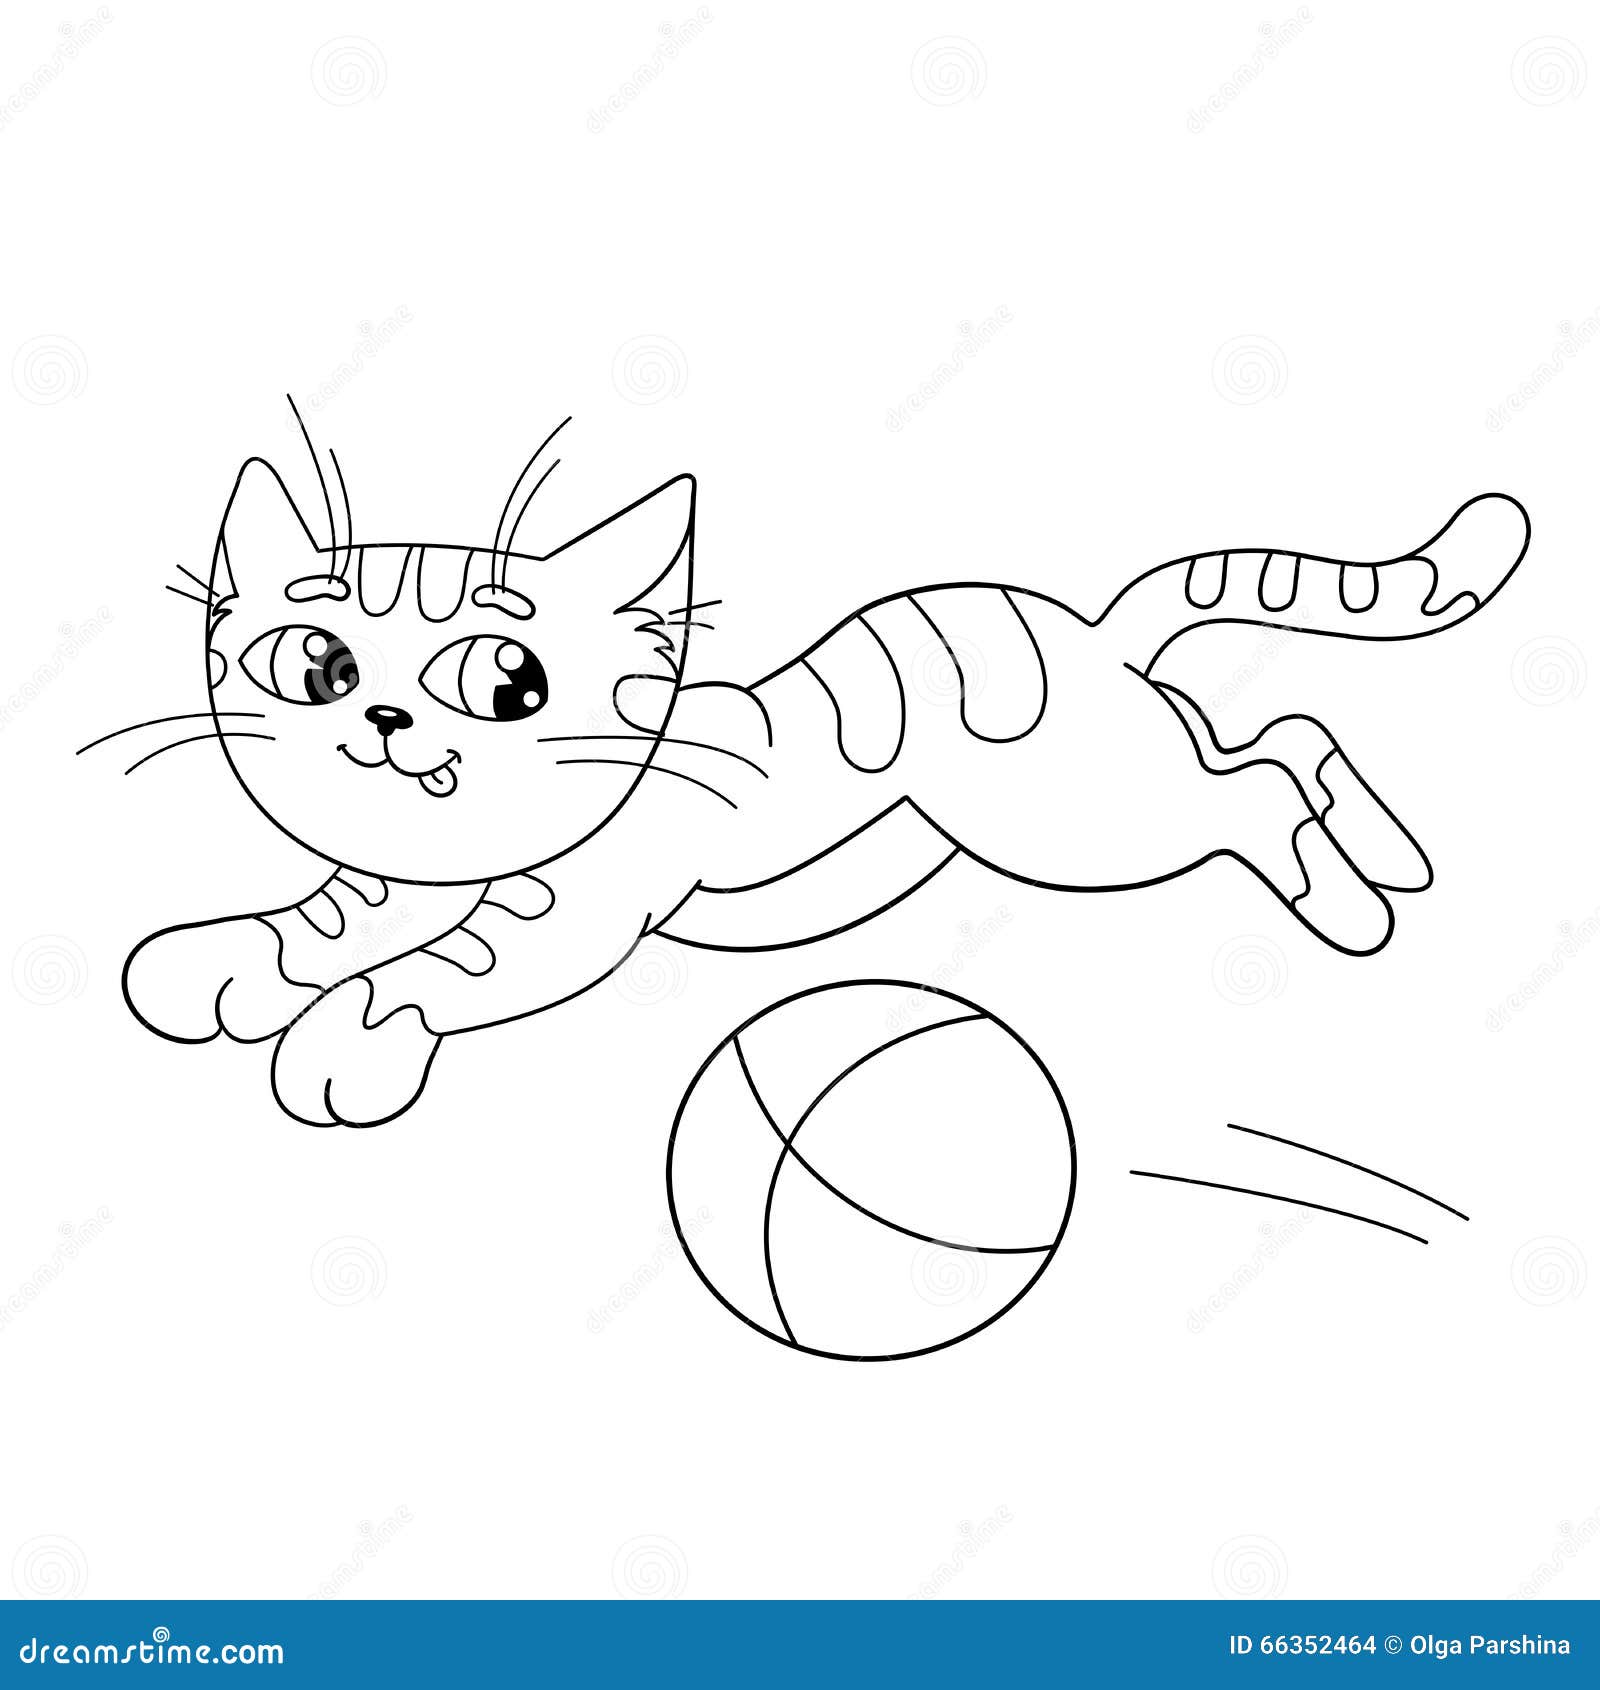  Coloring  Page  Outline Of A Fluffy Cat  Playing With Ball  